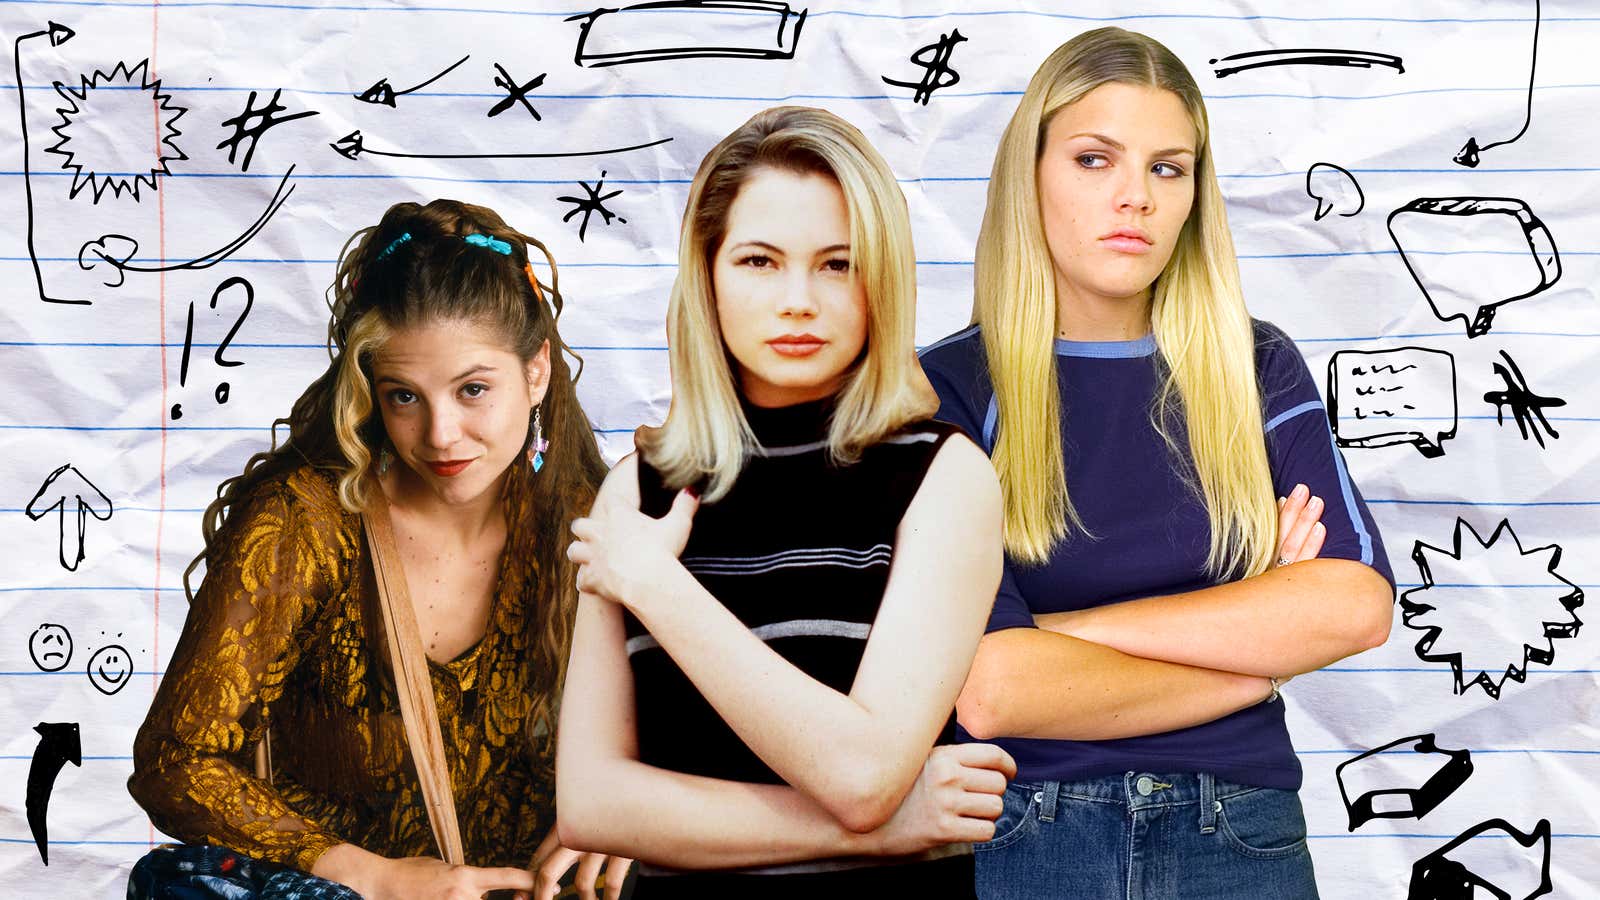 A Love Letter to the Hopeless Bad Girls of '90s Teen Soaps, Who Never Got the Stories They Deserved